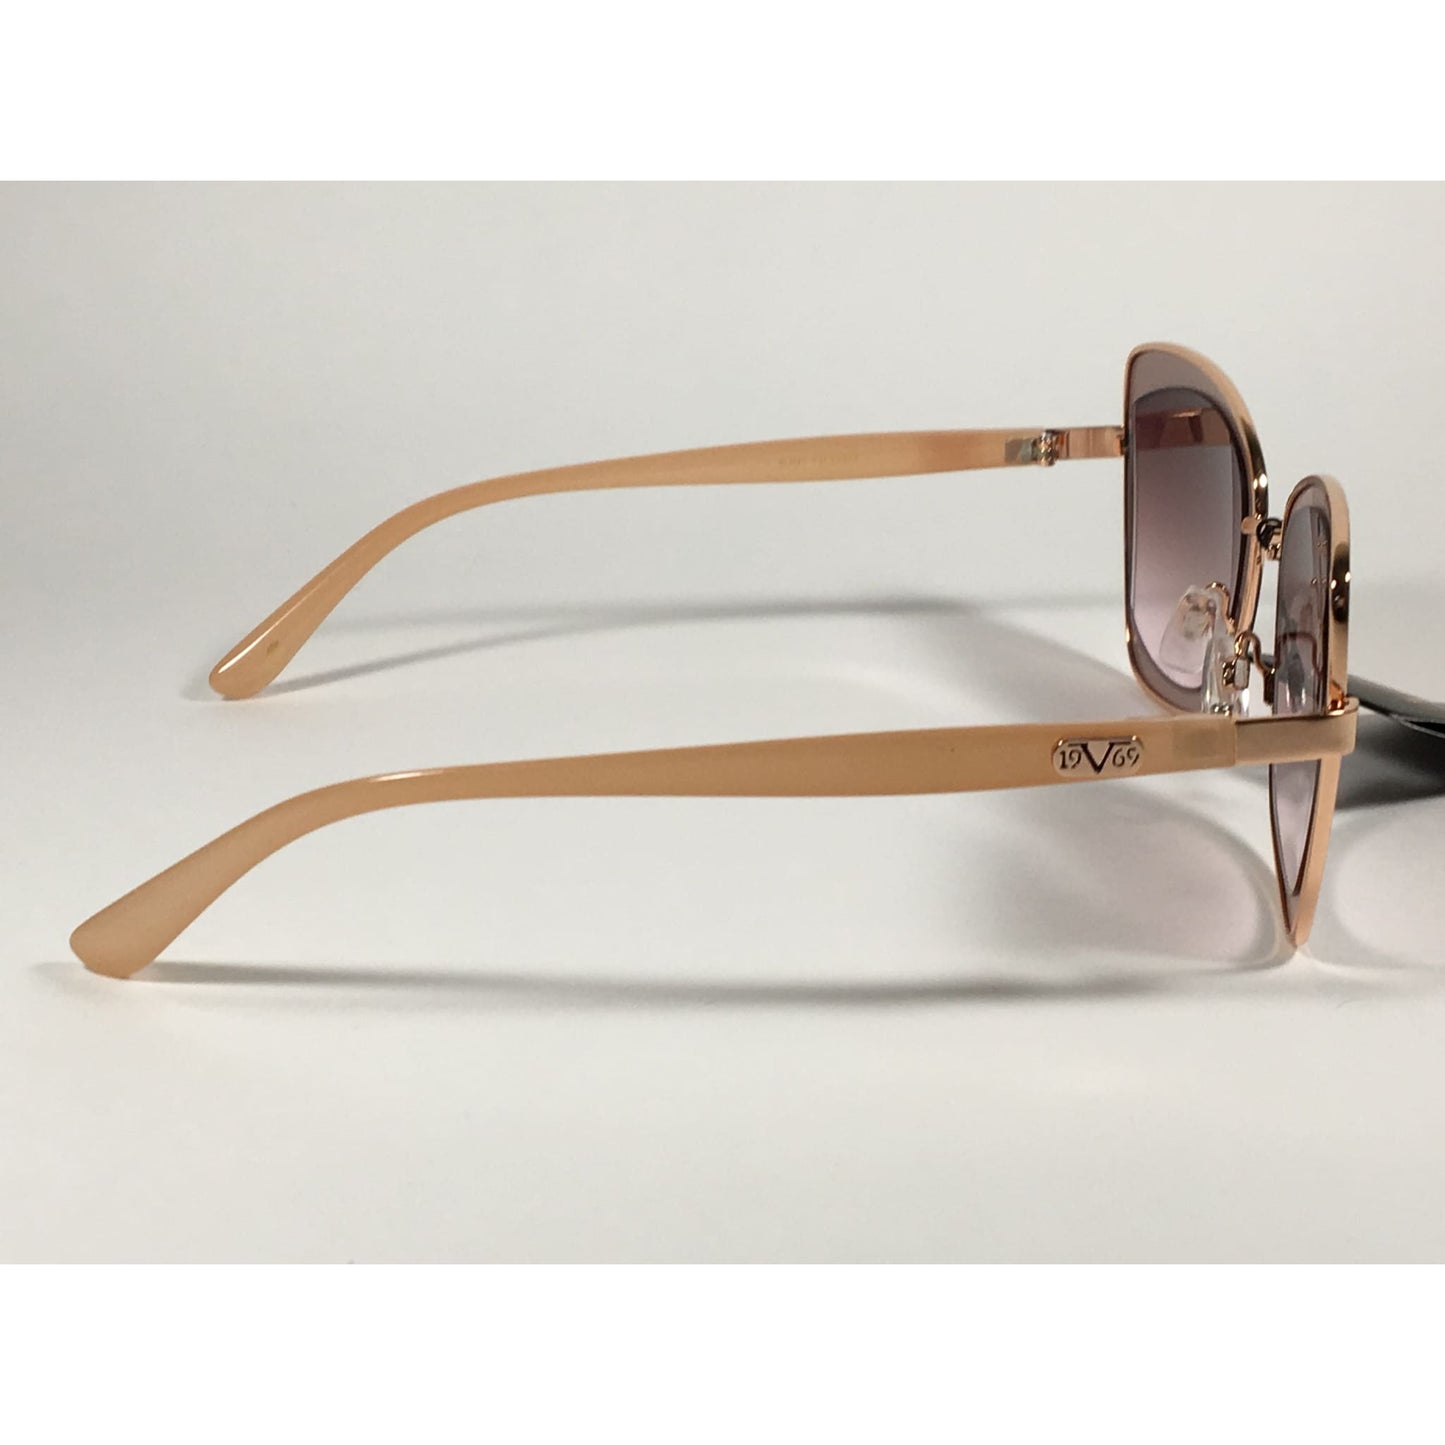 Versace 19V69 Italia Liliana Butterfly Sunglasses Rose Gold and Nude Frame Brown Rose Gradient Lens - Sunglasses